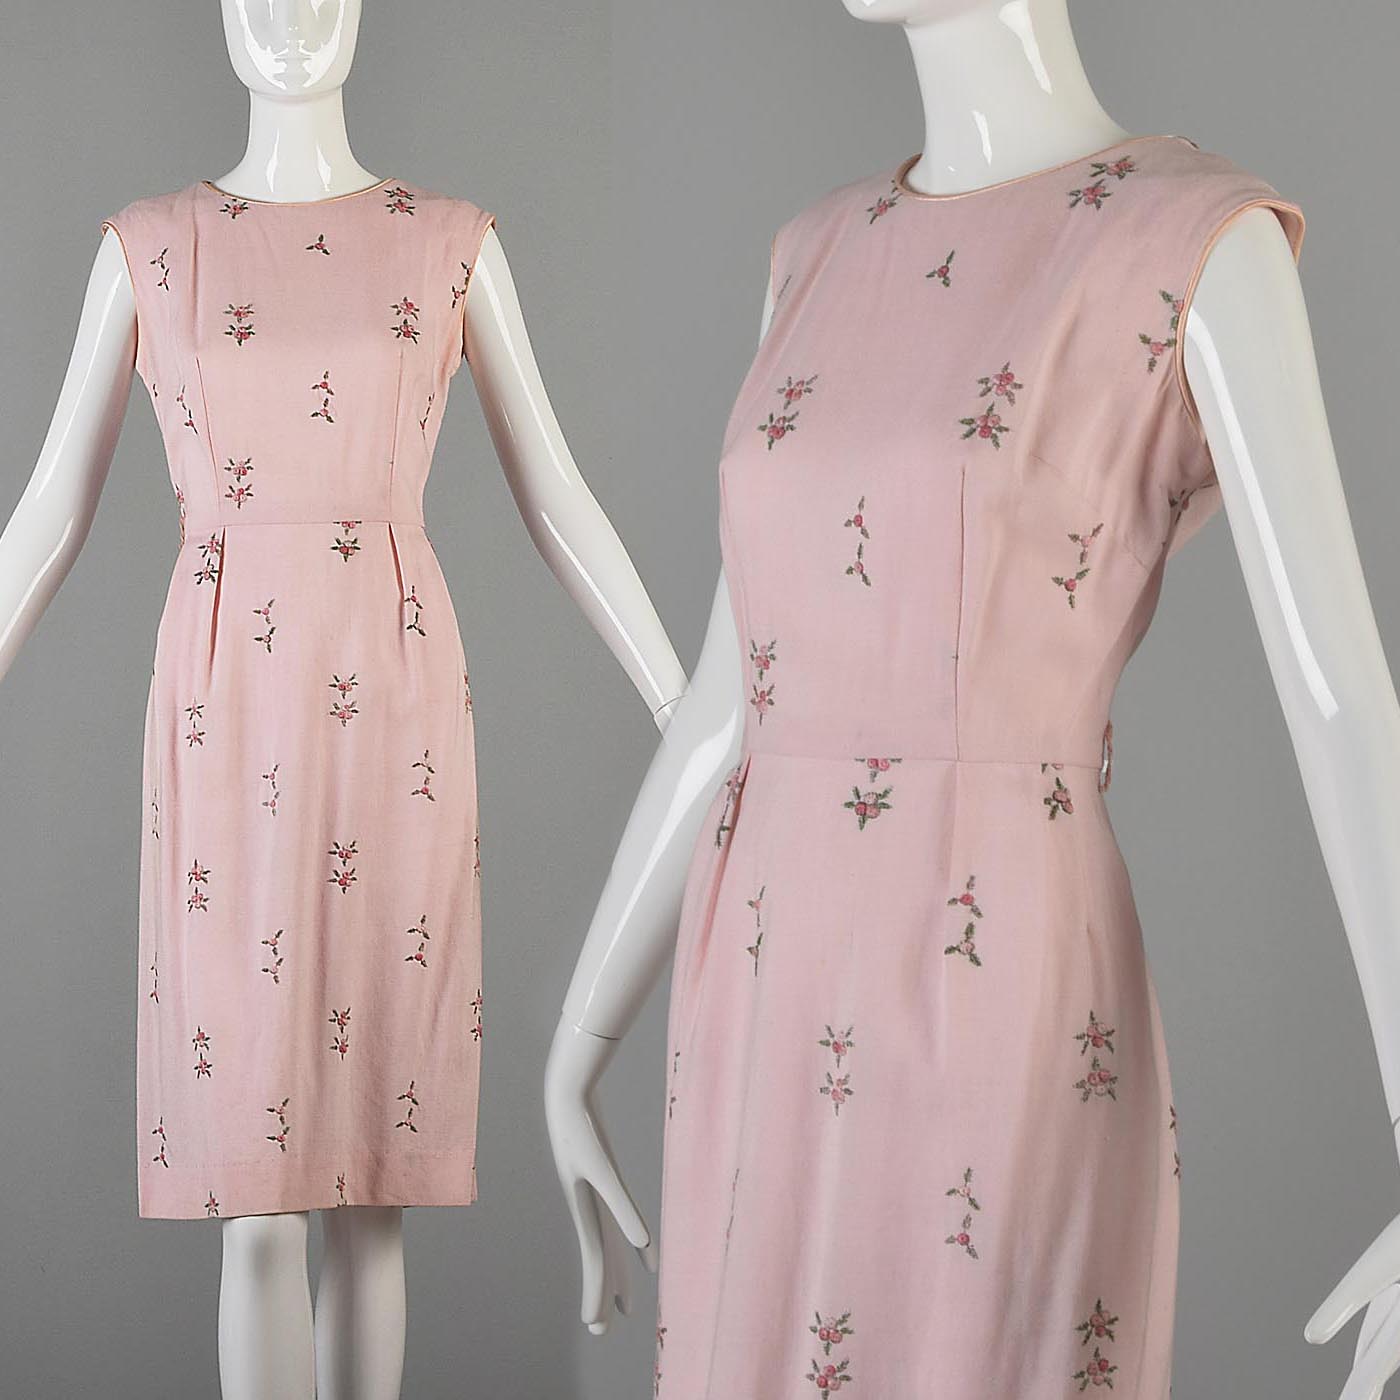 1950s Pink Sleeveless Day Dress with Floral Embroidery